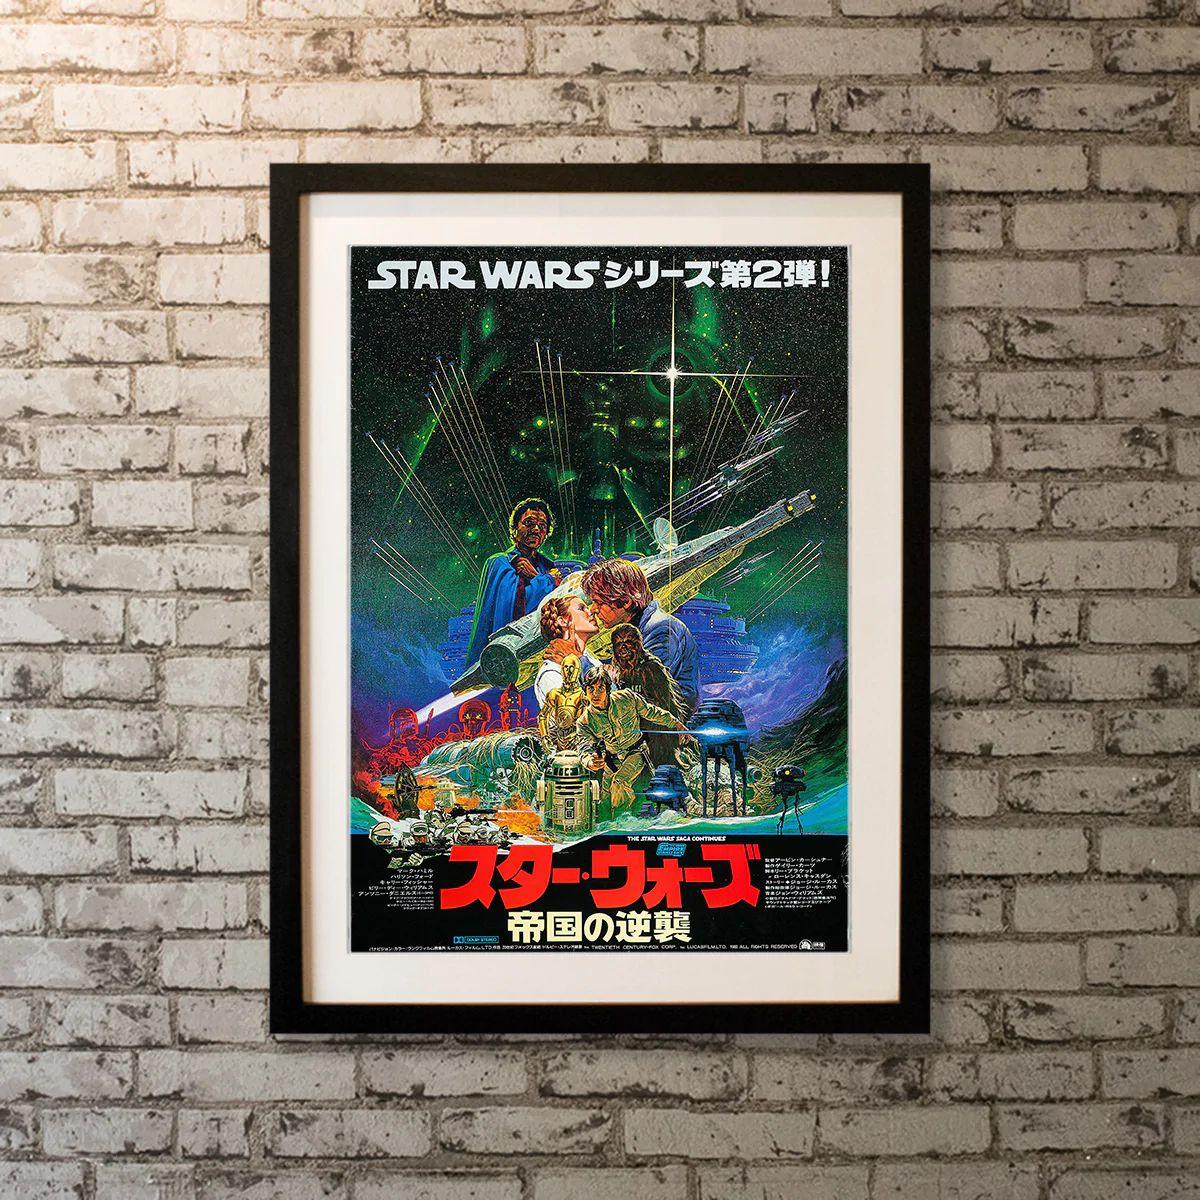 Star Wars: The Empire Strikes Back, unframed poster, 1980

Japanese B2 (20 X 29 Inches). After the Rebels are brutally overpowered by the Empire on the ice planet Hoth, Luke Skywalker begins Jedi training with Yoda, while his friends are pursued